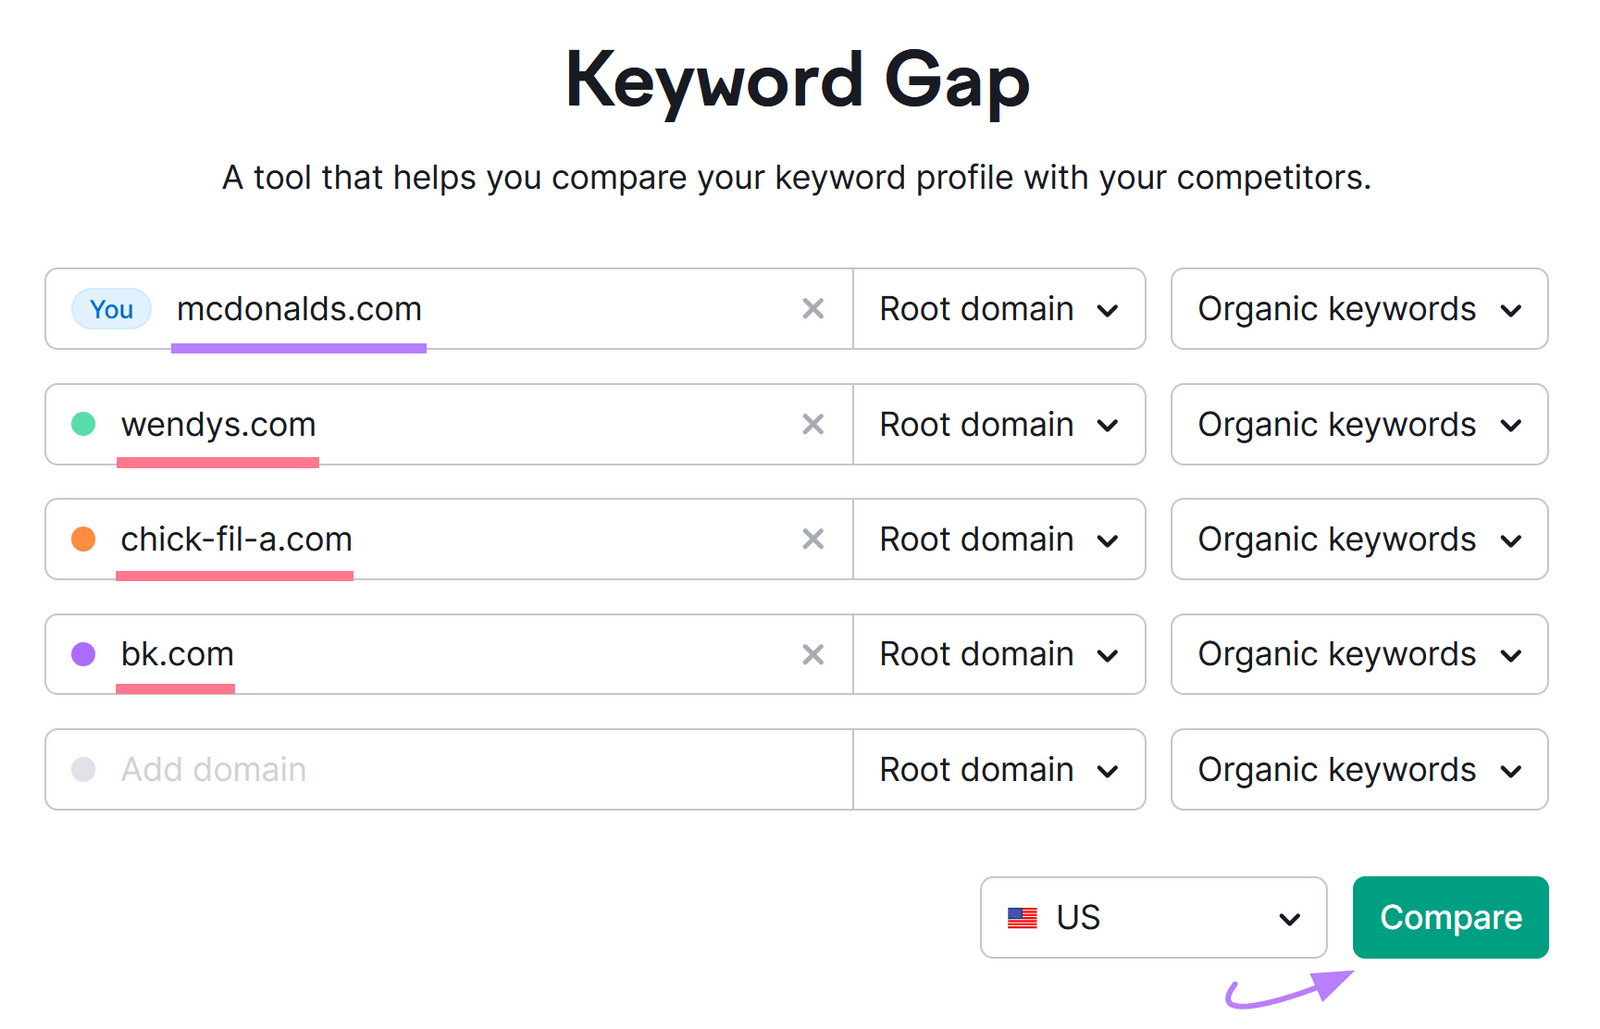 screenshot of Semrush’s Keyword Gap tool search bar with "Compare" button highlighted